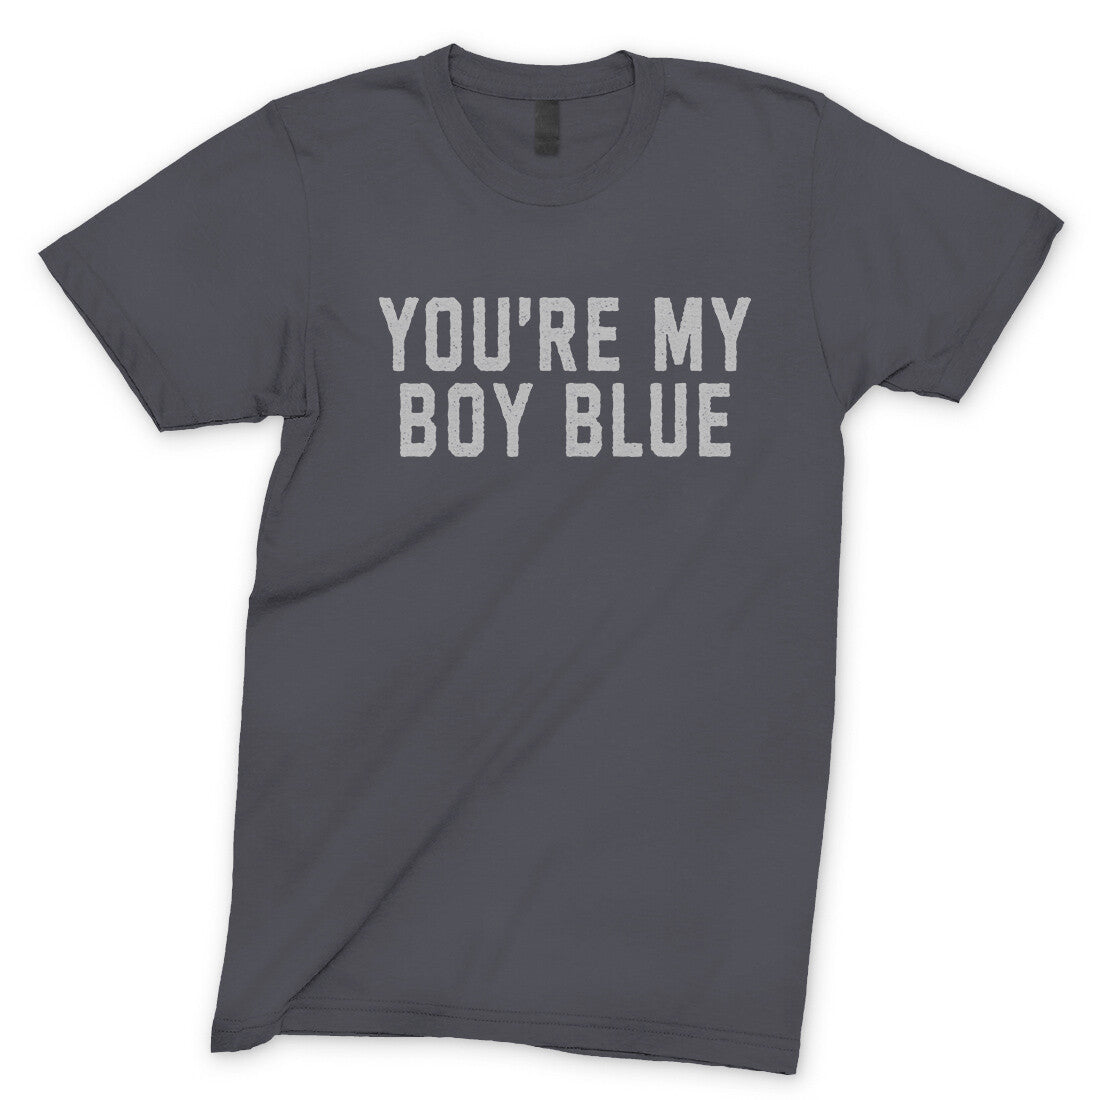 You're my Boy Blue in Charcoal Color